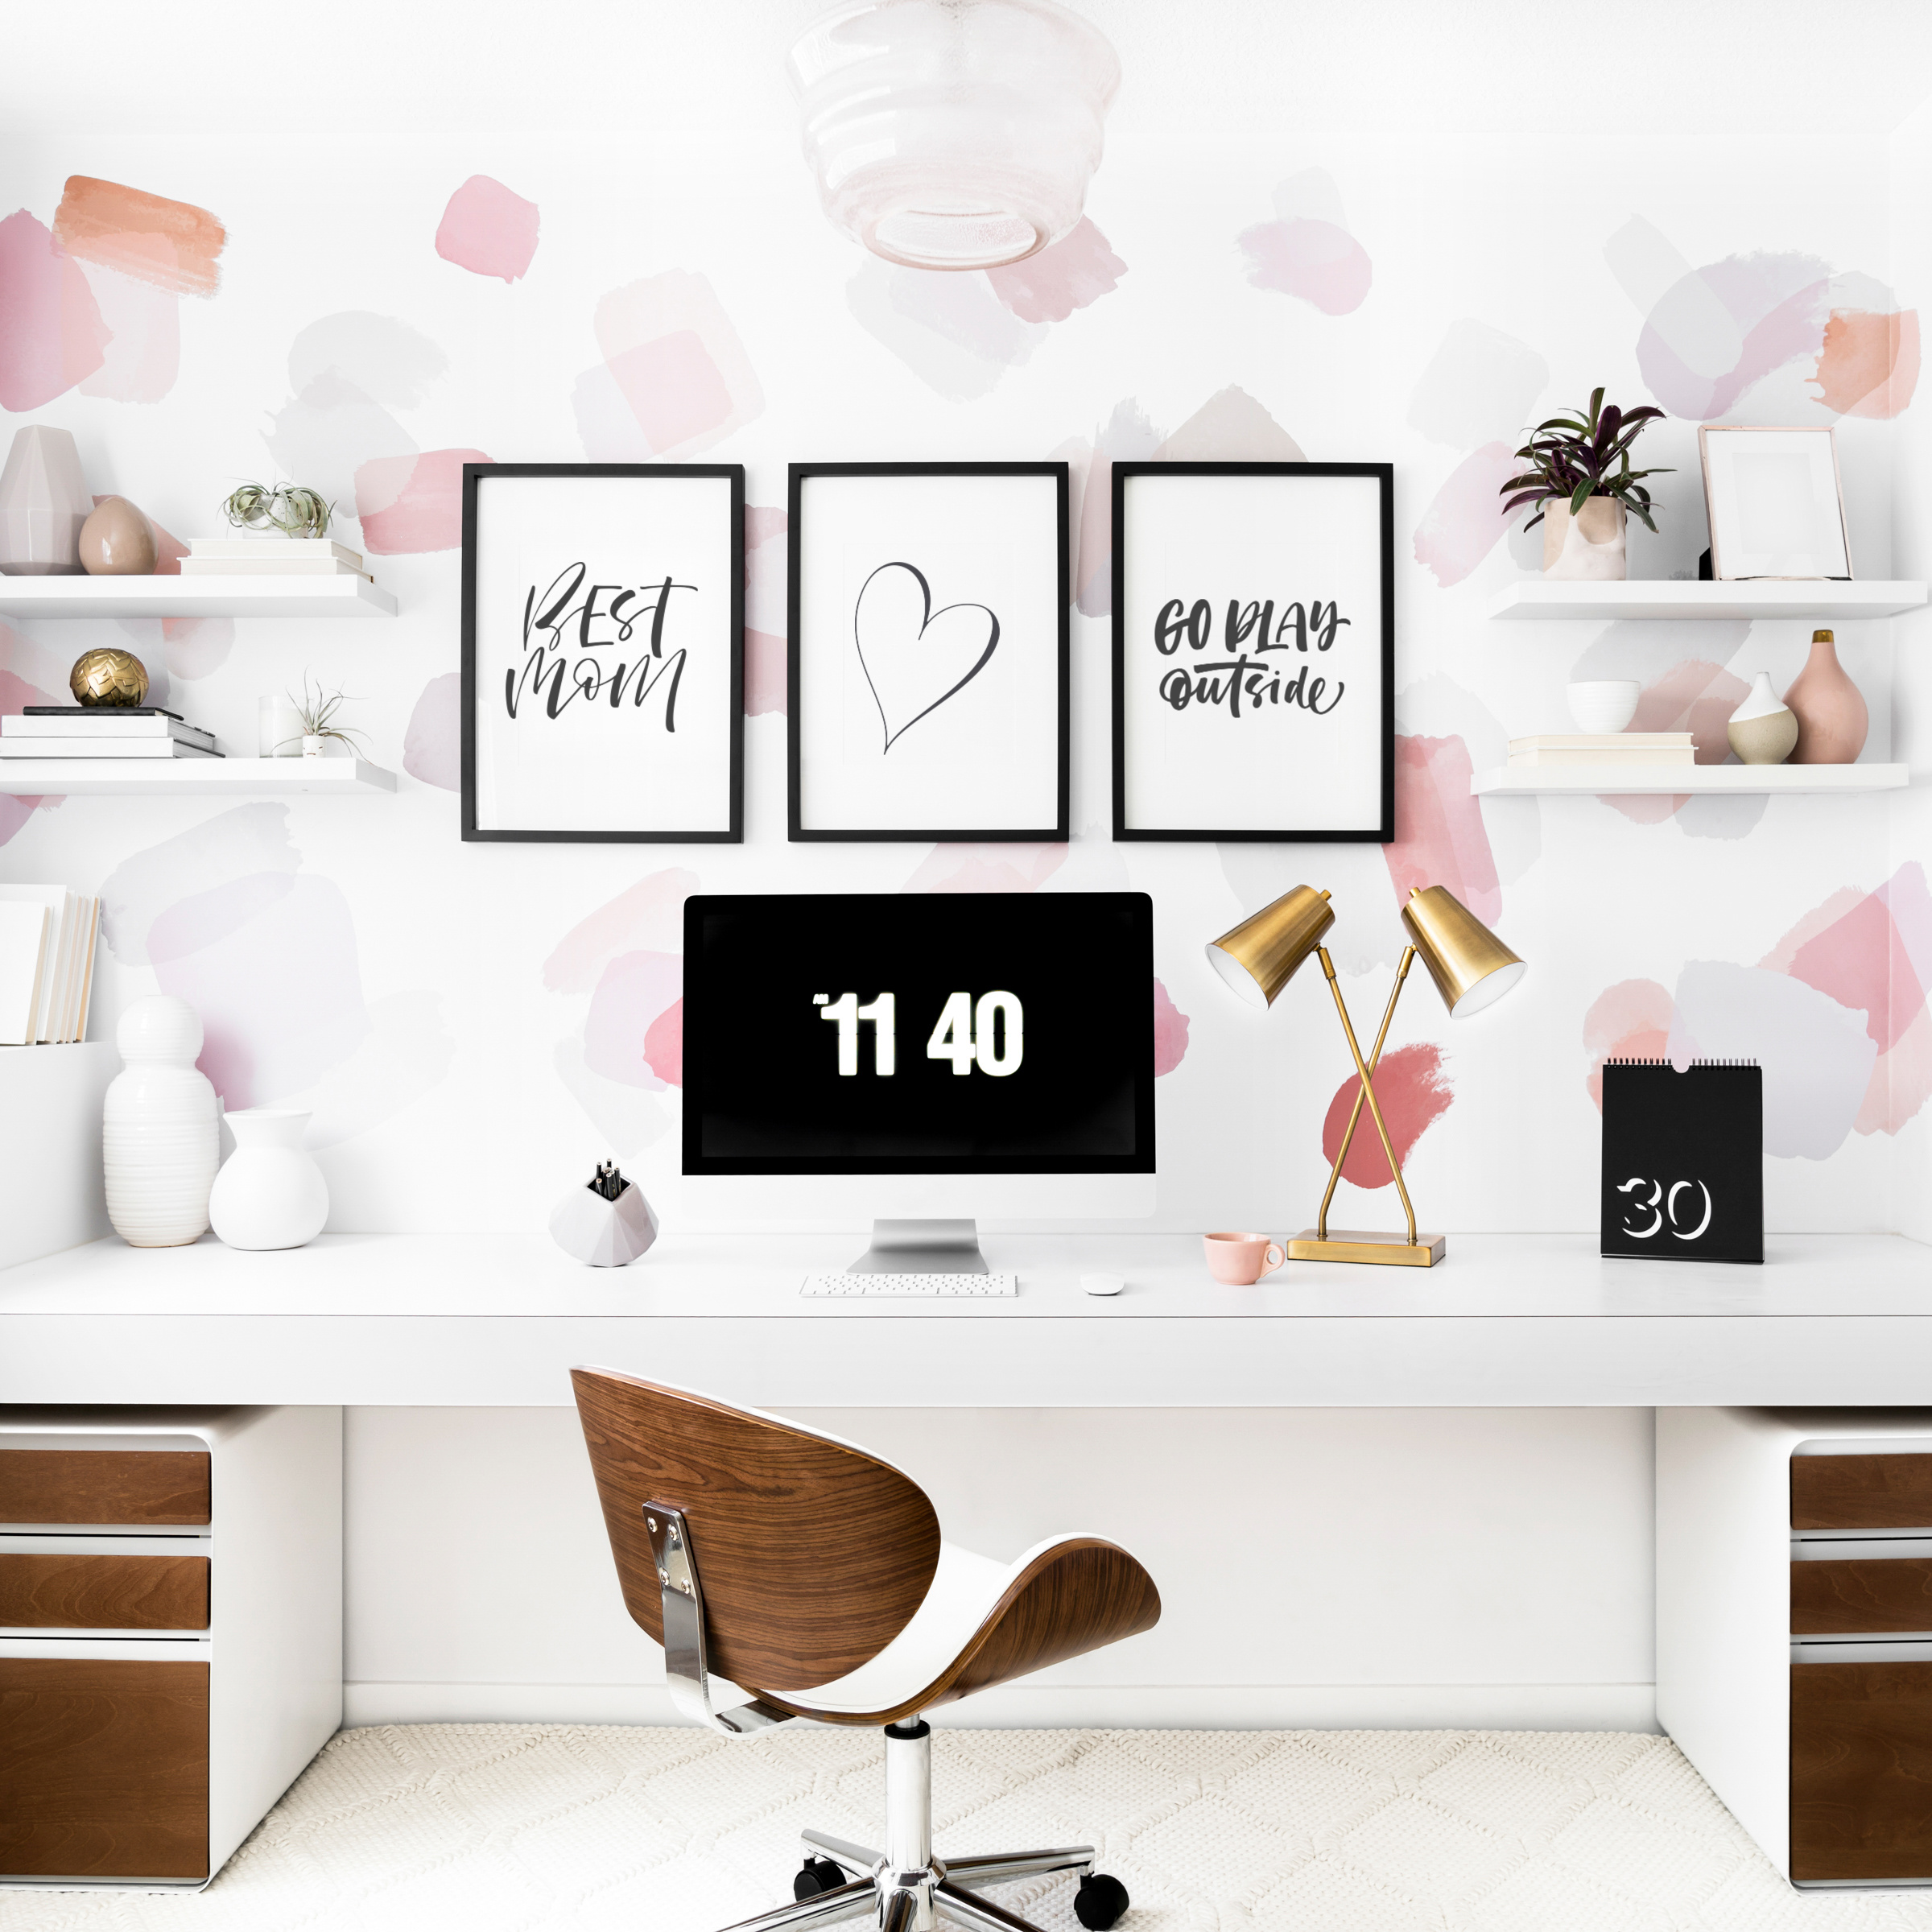 https://thesweetestdigs.com/wp-content/uploads/2020/07/pink-and-gold-office-decor-chic-home-2.jpg